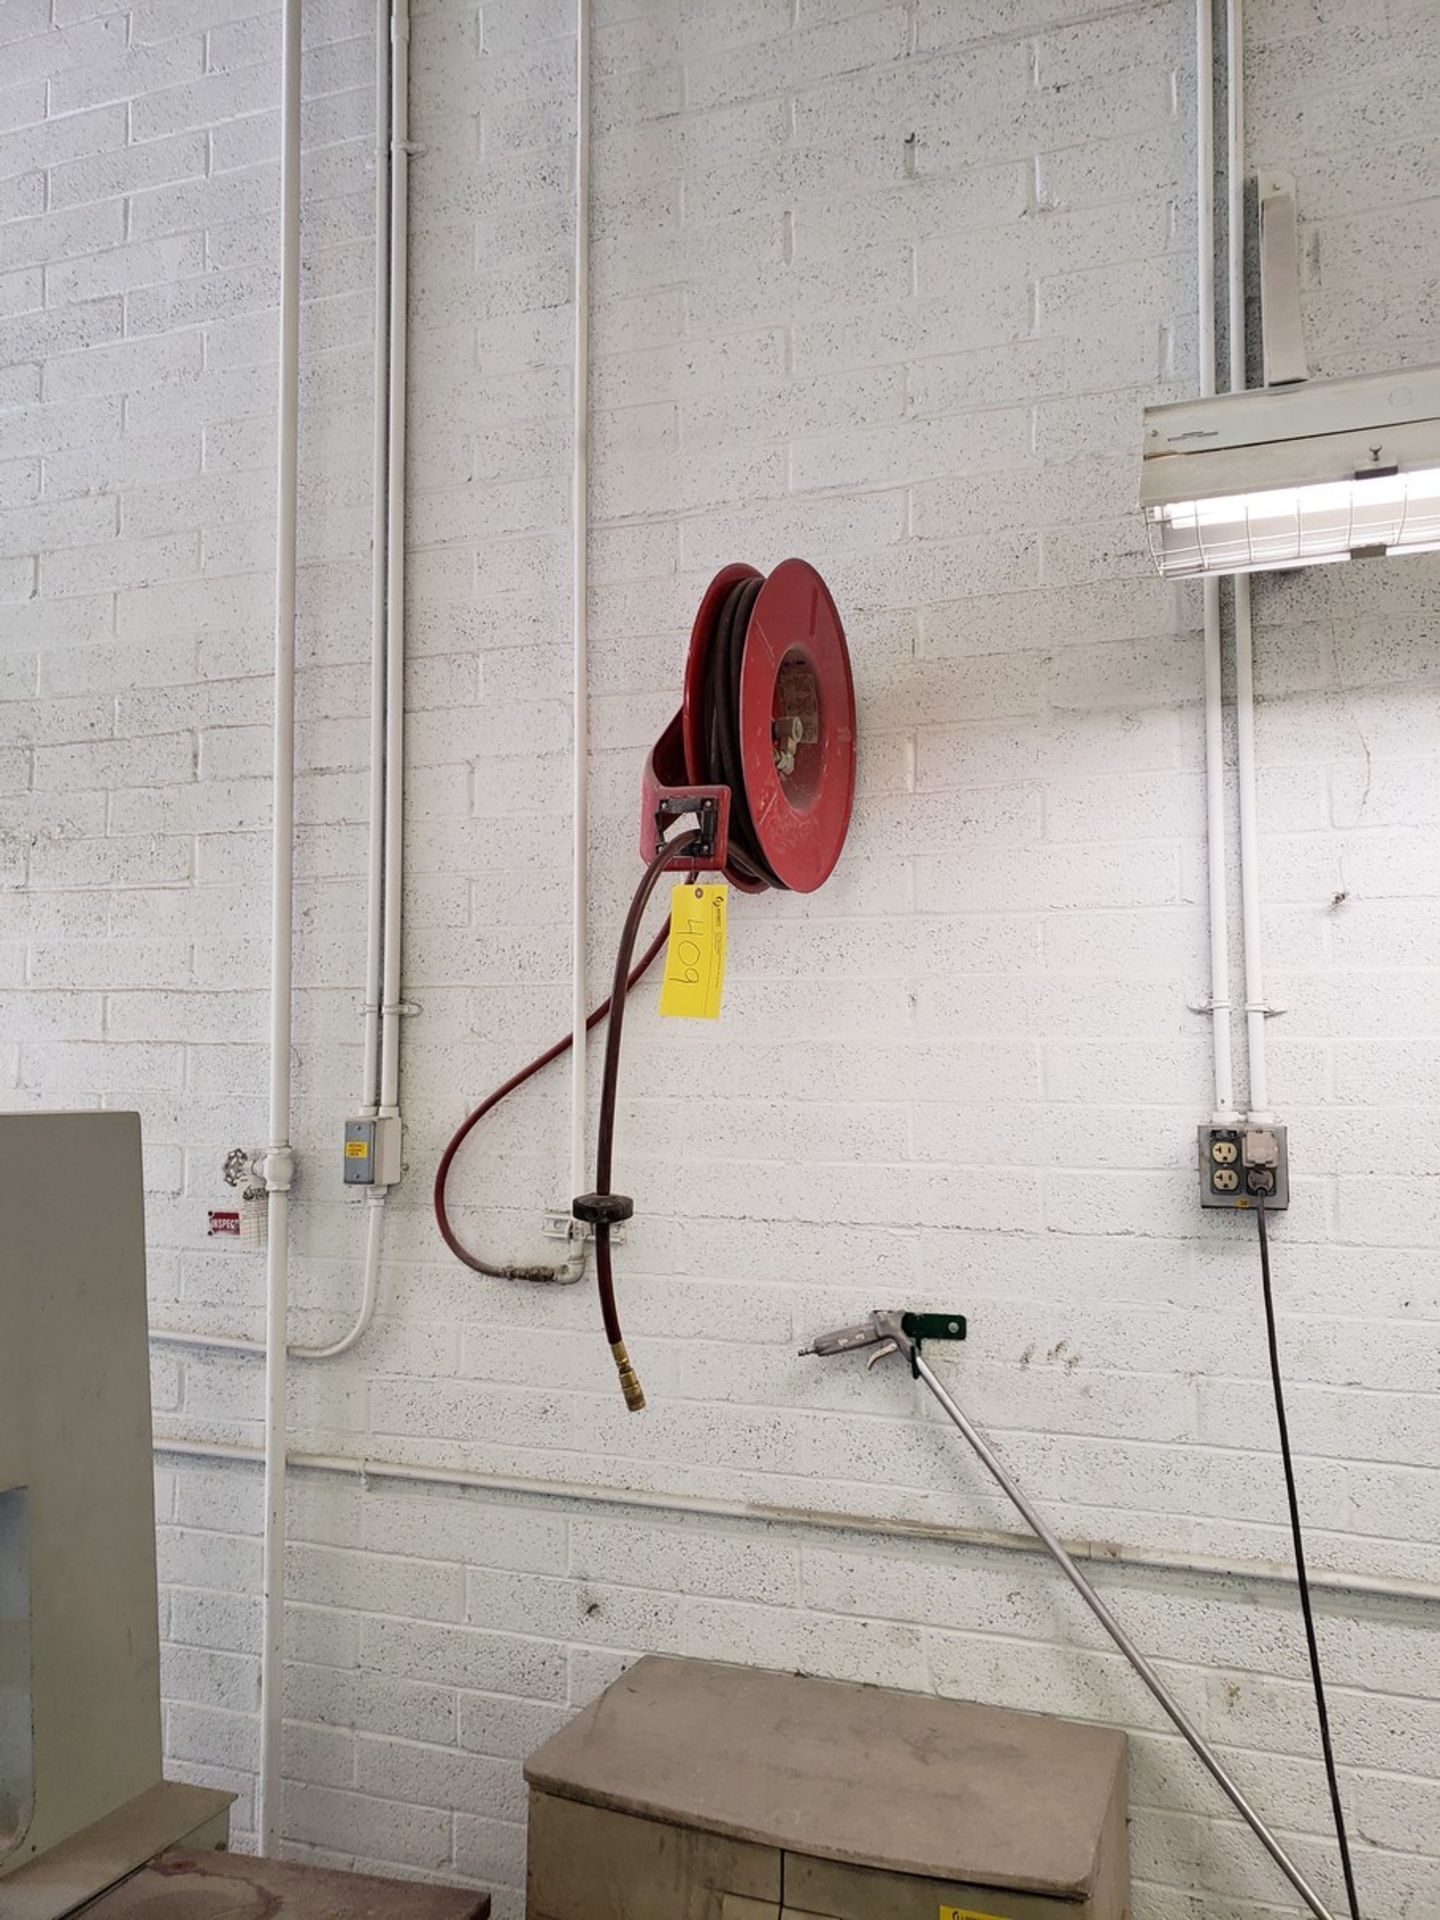 REEL CRAFT AIR HOSE REELS X 3, 2 MOUNTED ON WALL 1 IN CEILING, 50 FOOT HOSES (MACHINE SHOP) - Image 3 of 3